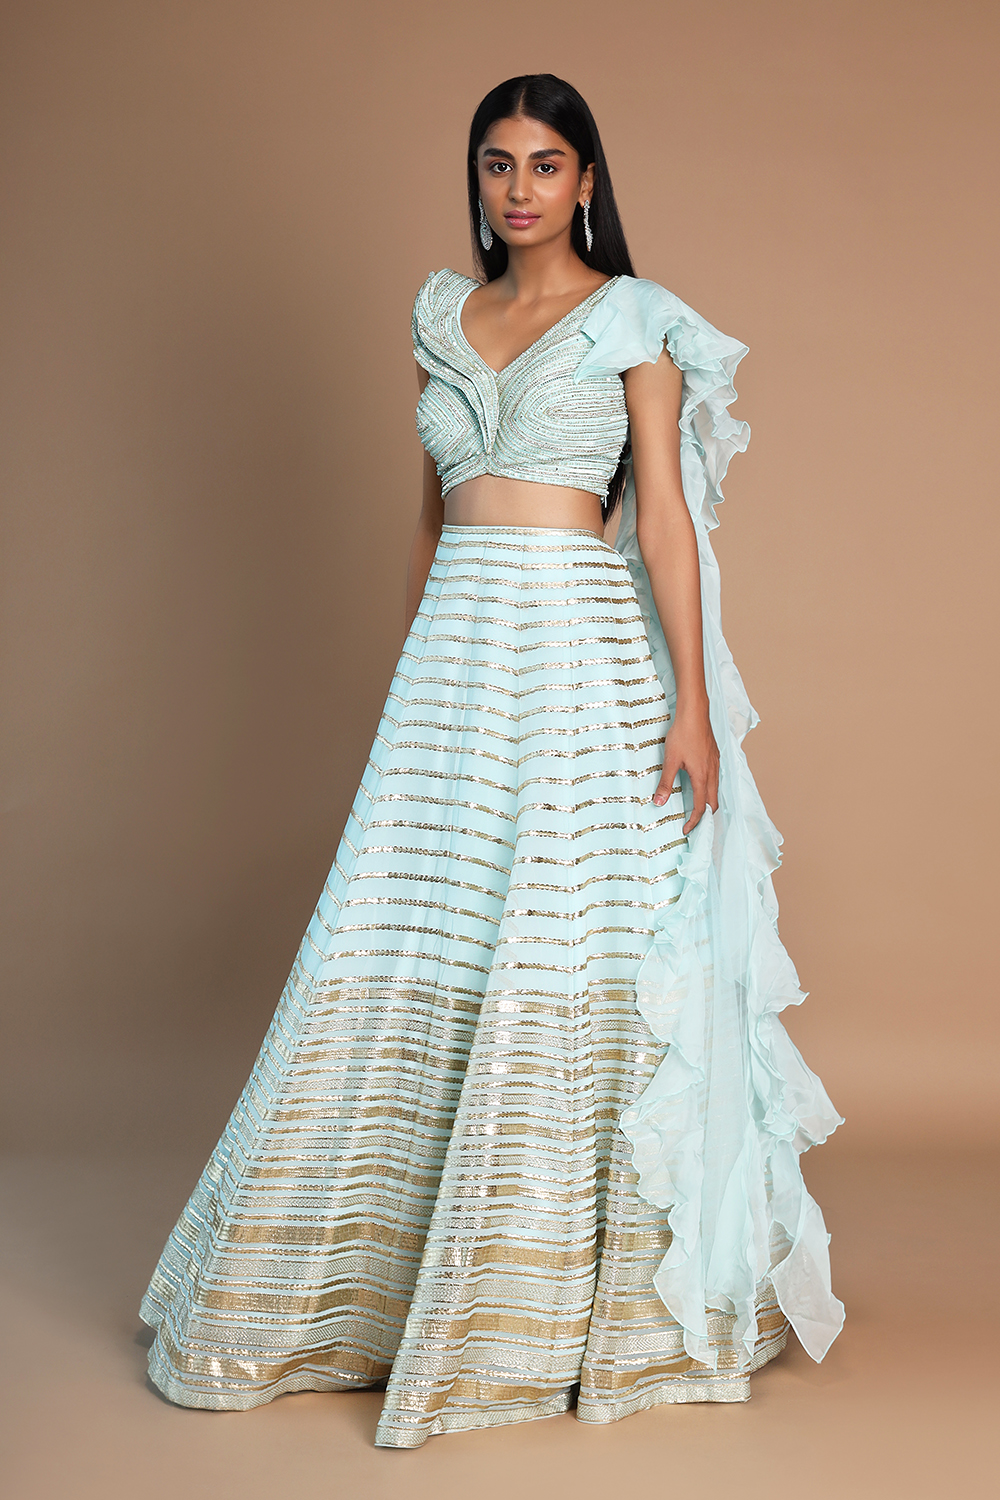 Crop Tops and Lehengas are Ruling the Indian Wedding Chart(2020): Here We  Bring You Some Lehenga Recommendations and Tips to Keep in Mind While  Teaming up Your Statement Crop Tops with Lehengas.